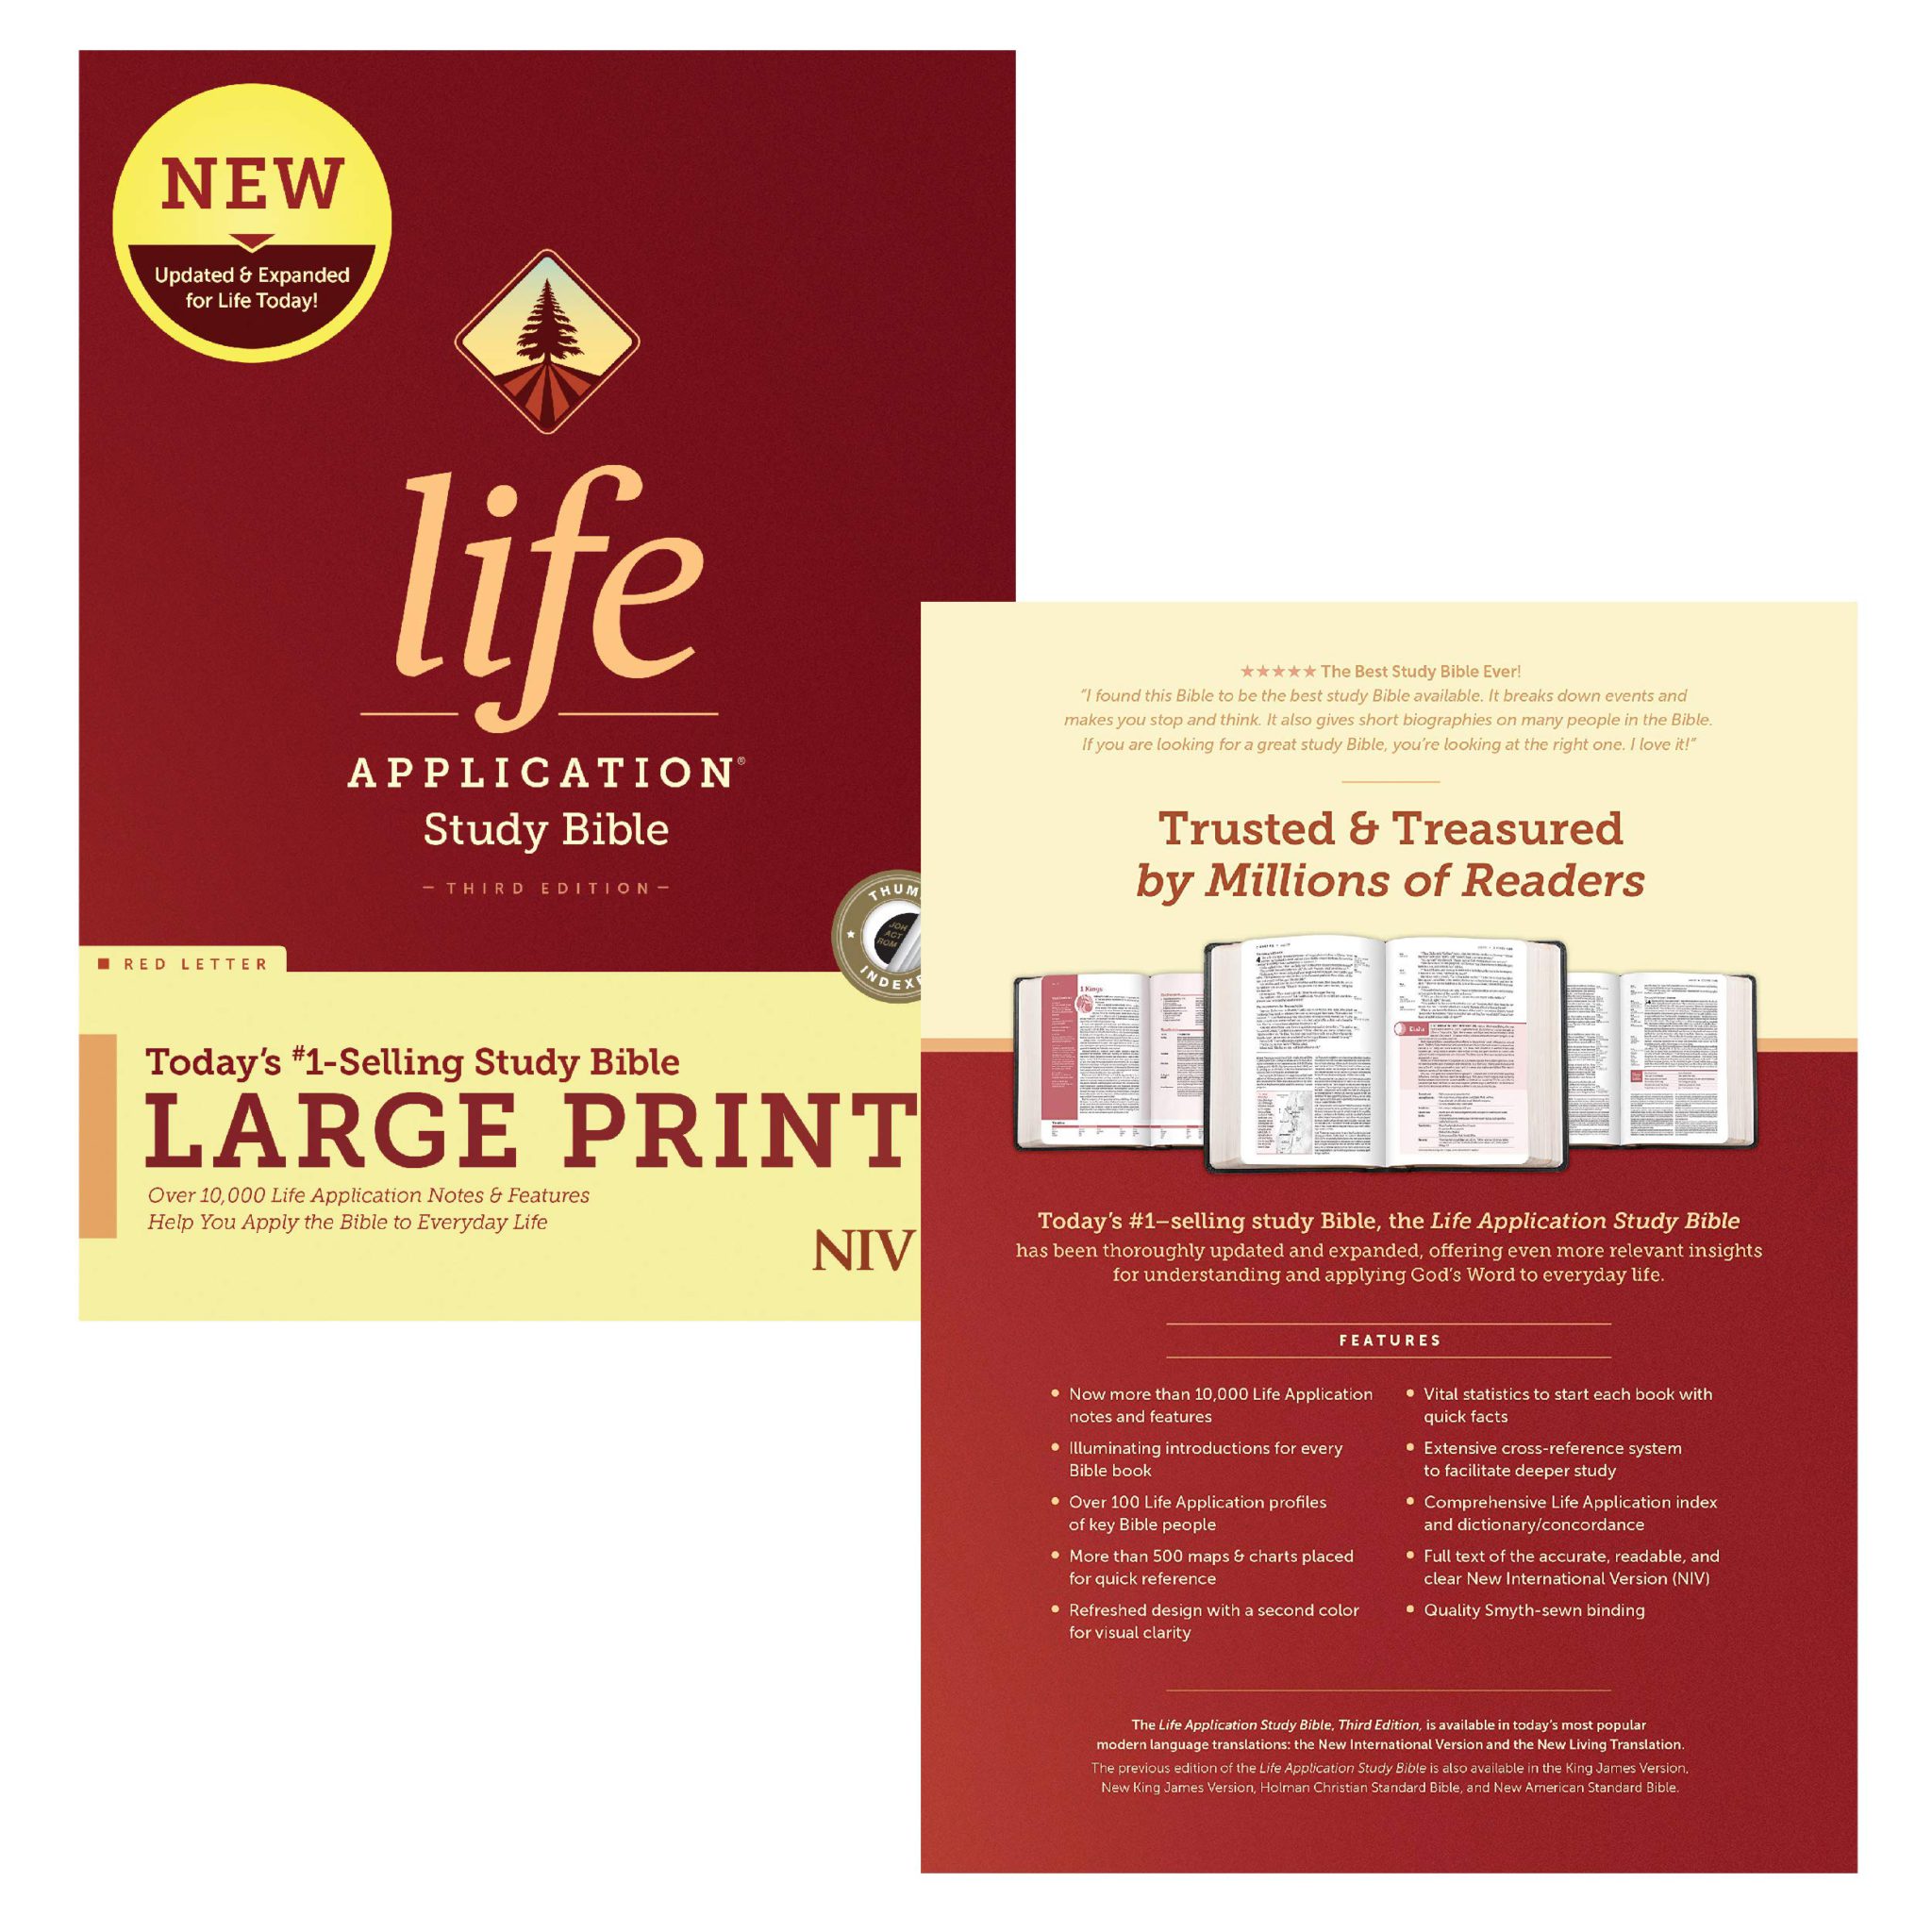 niv-life-application-study-bible-third-edition-large-print-red-letter-hardcover-indexed